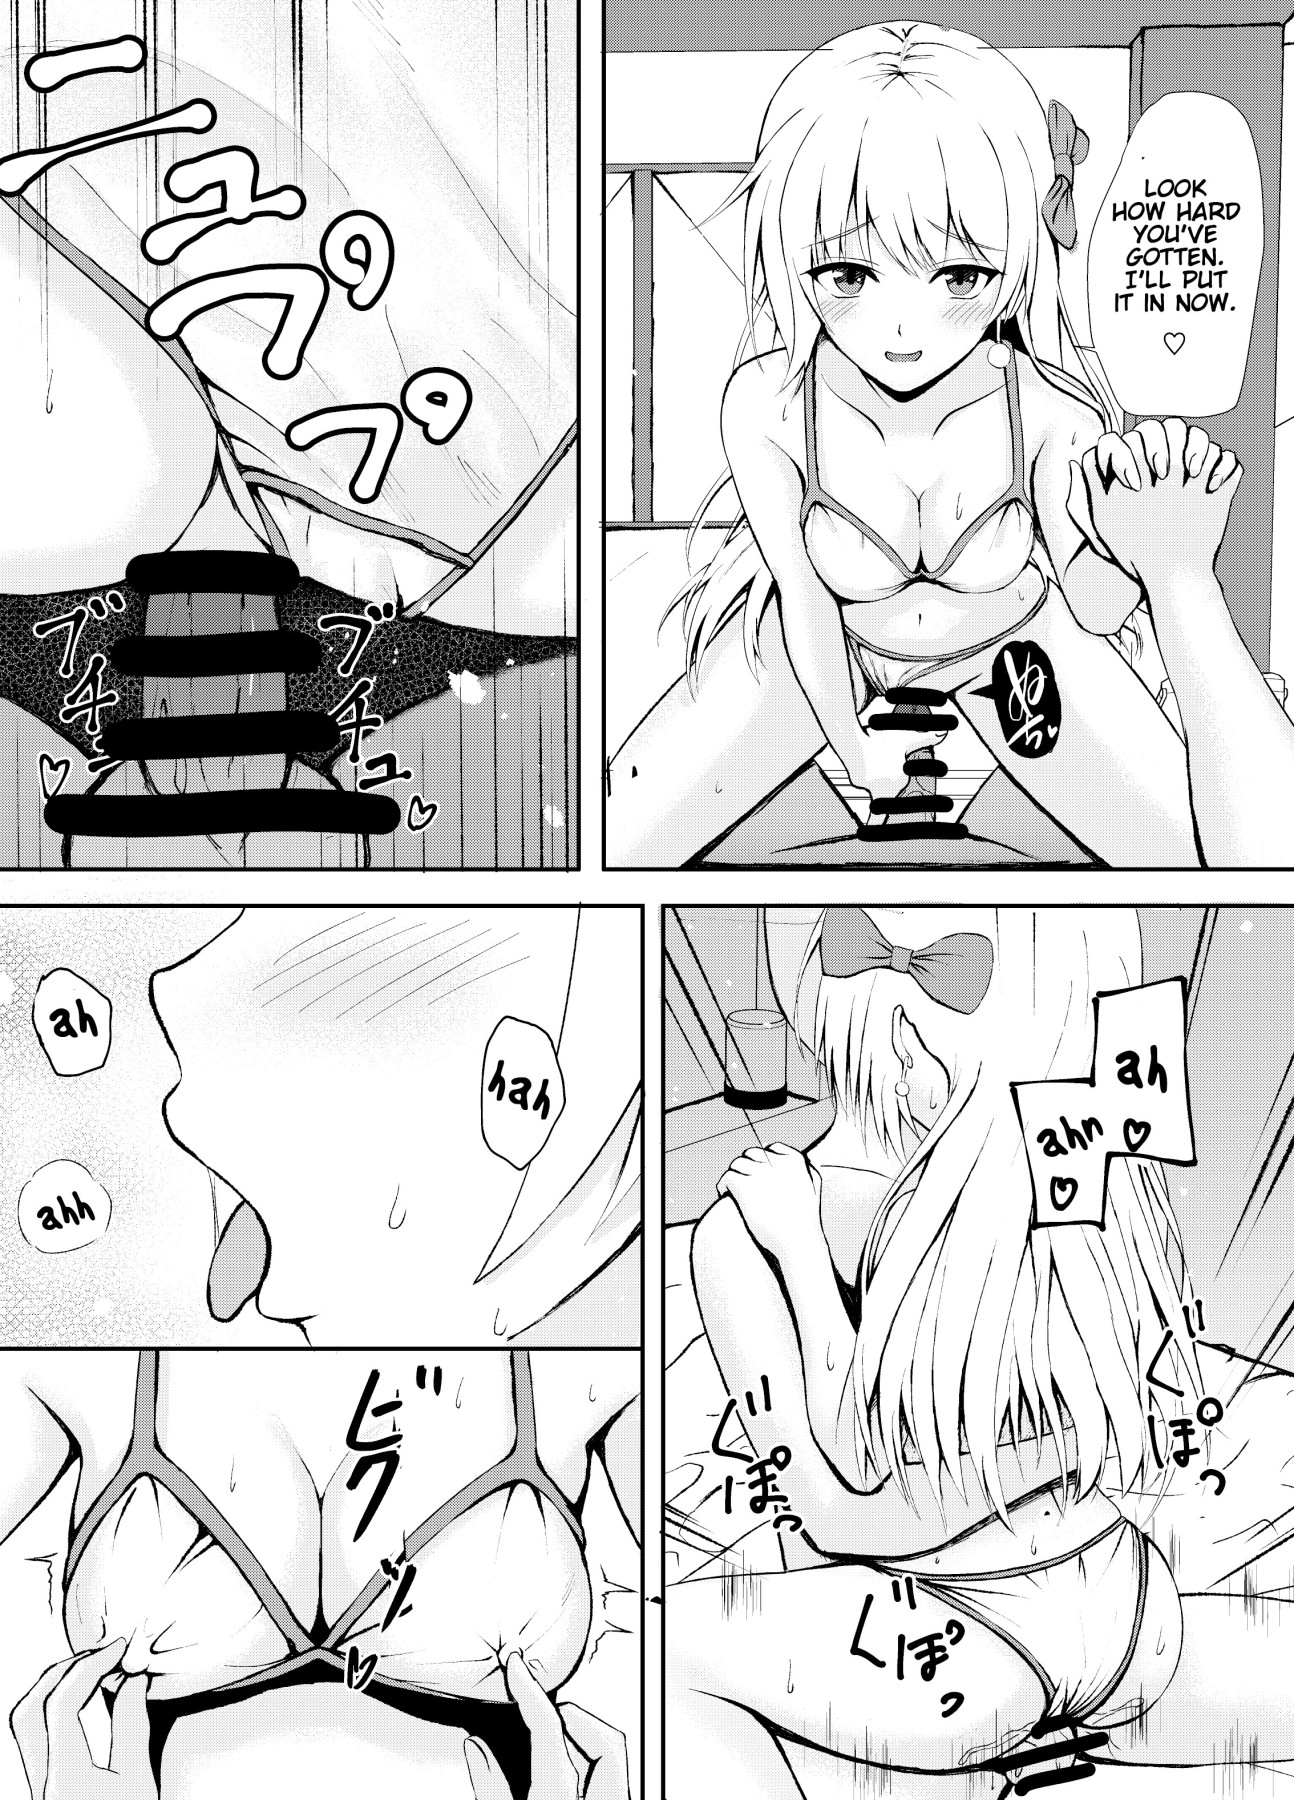 Hentai Manga Comic-A Manga About a Girl Who Does Has No Interest in People She Knows, but Fucks Like a Rabbit Behind Closed Doors-Read-2